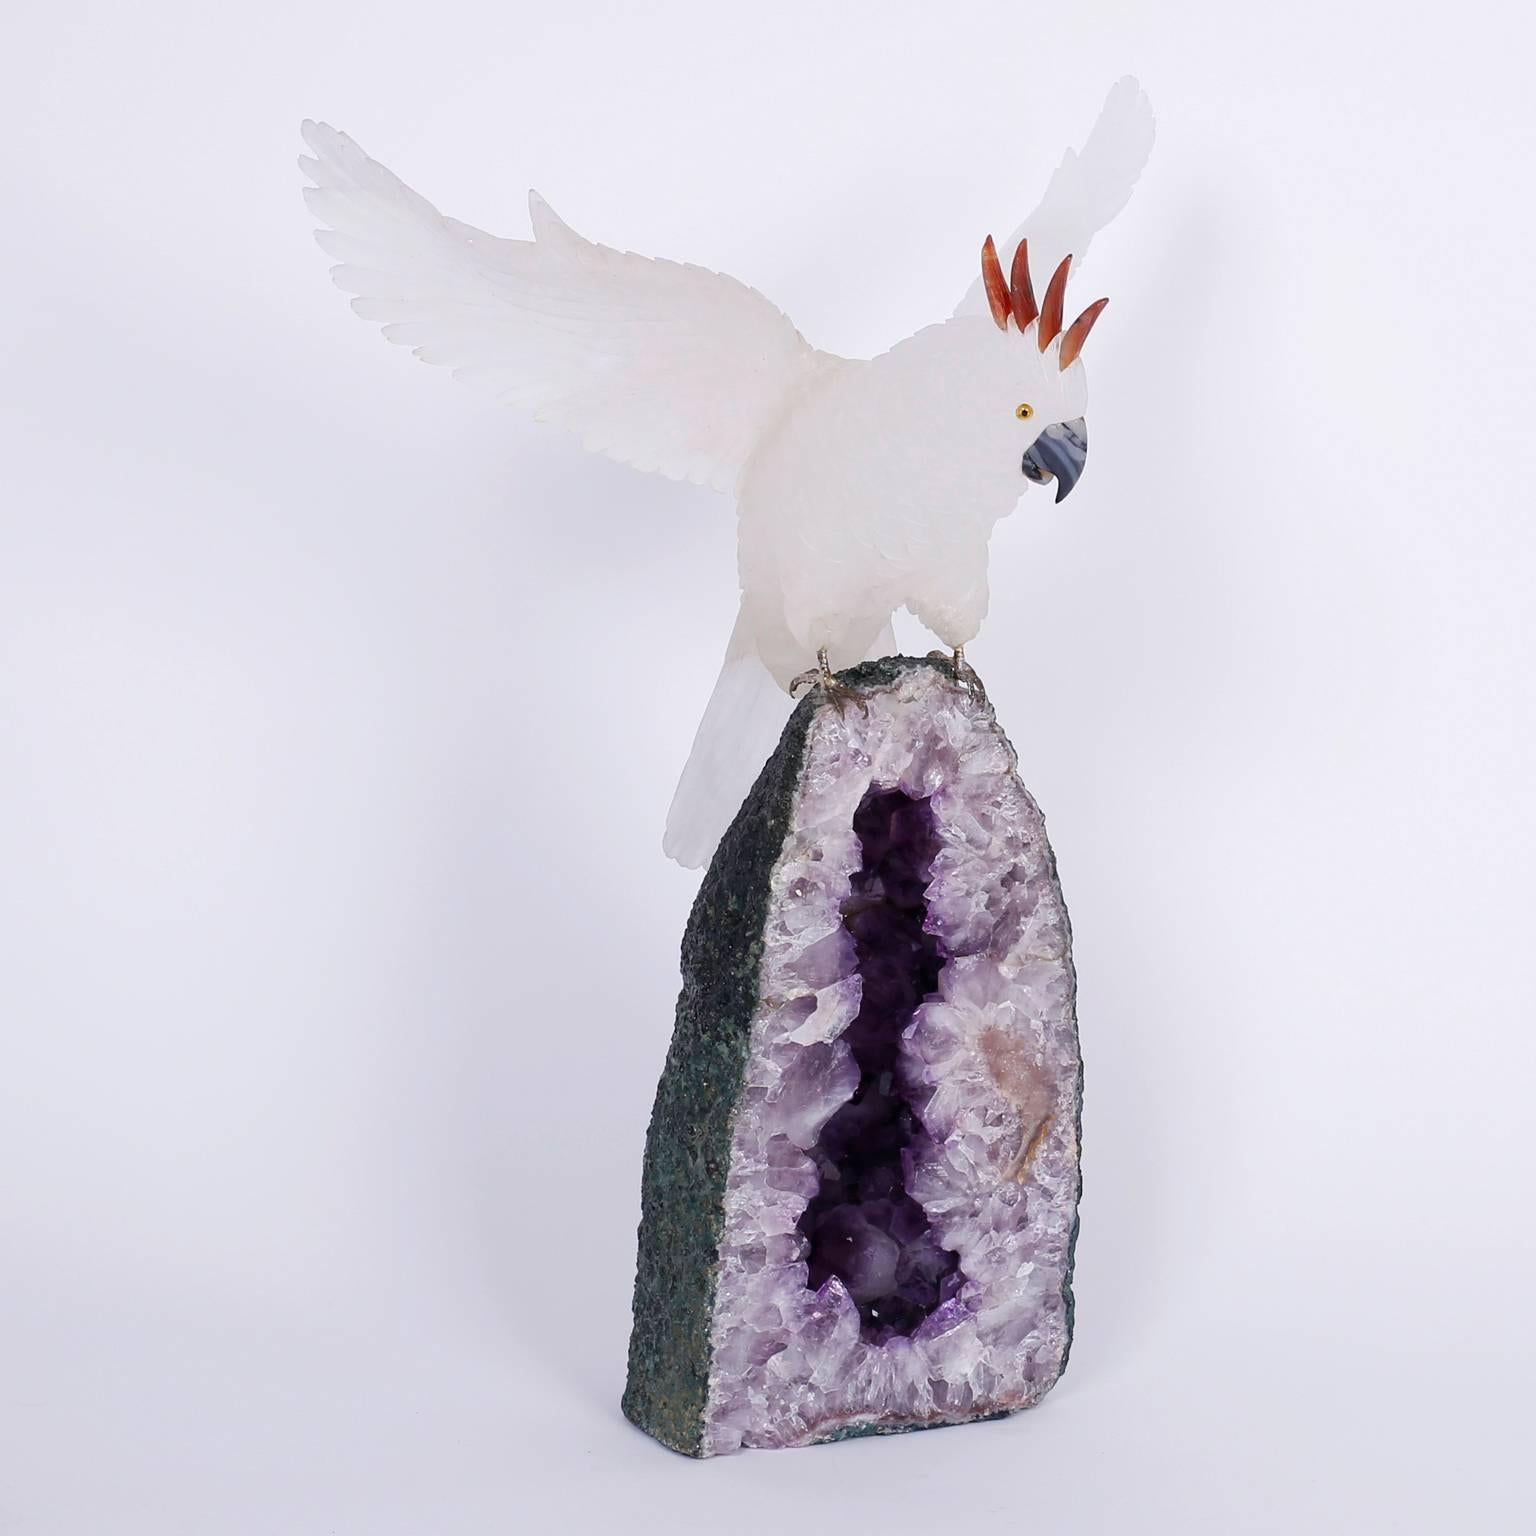 Carved stone cockatoo sculpture caught in the action of landing on an amethyst geode. Featuring a lofty combination of colors and textures with an unlikely life-like attention to detail.